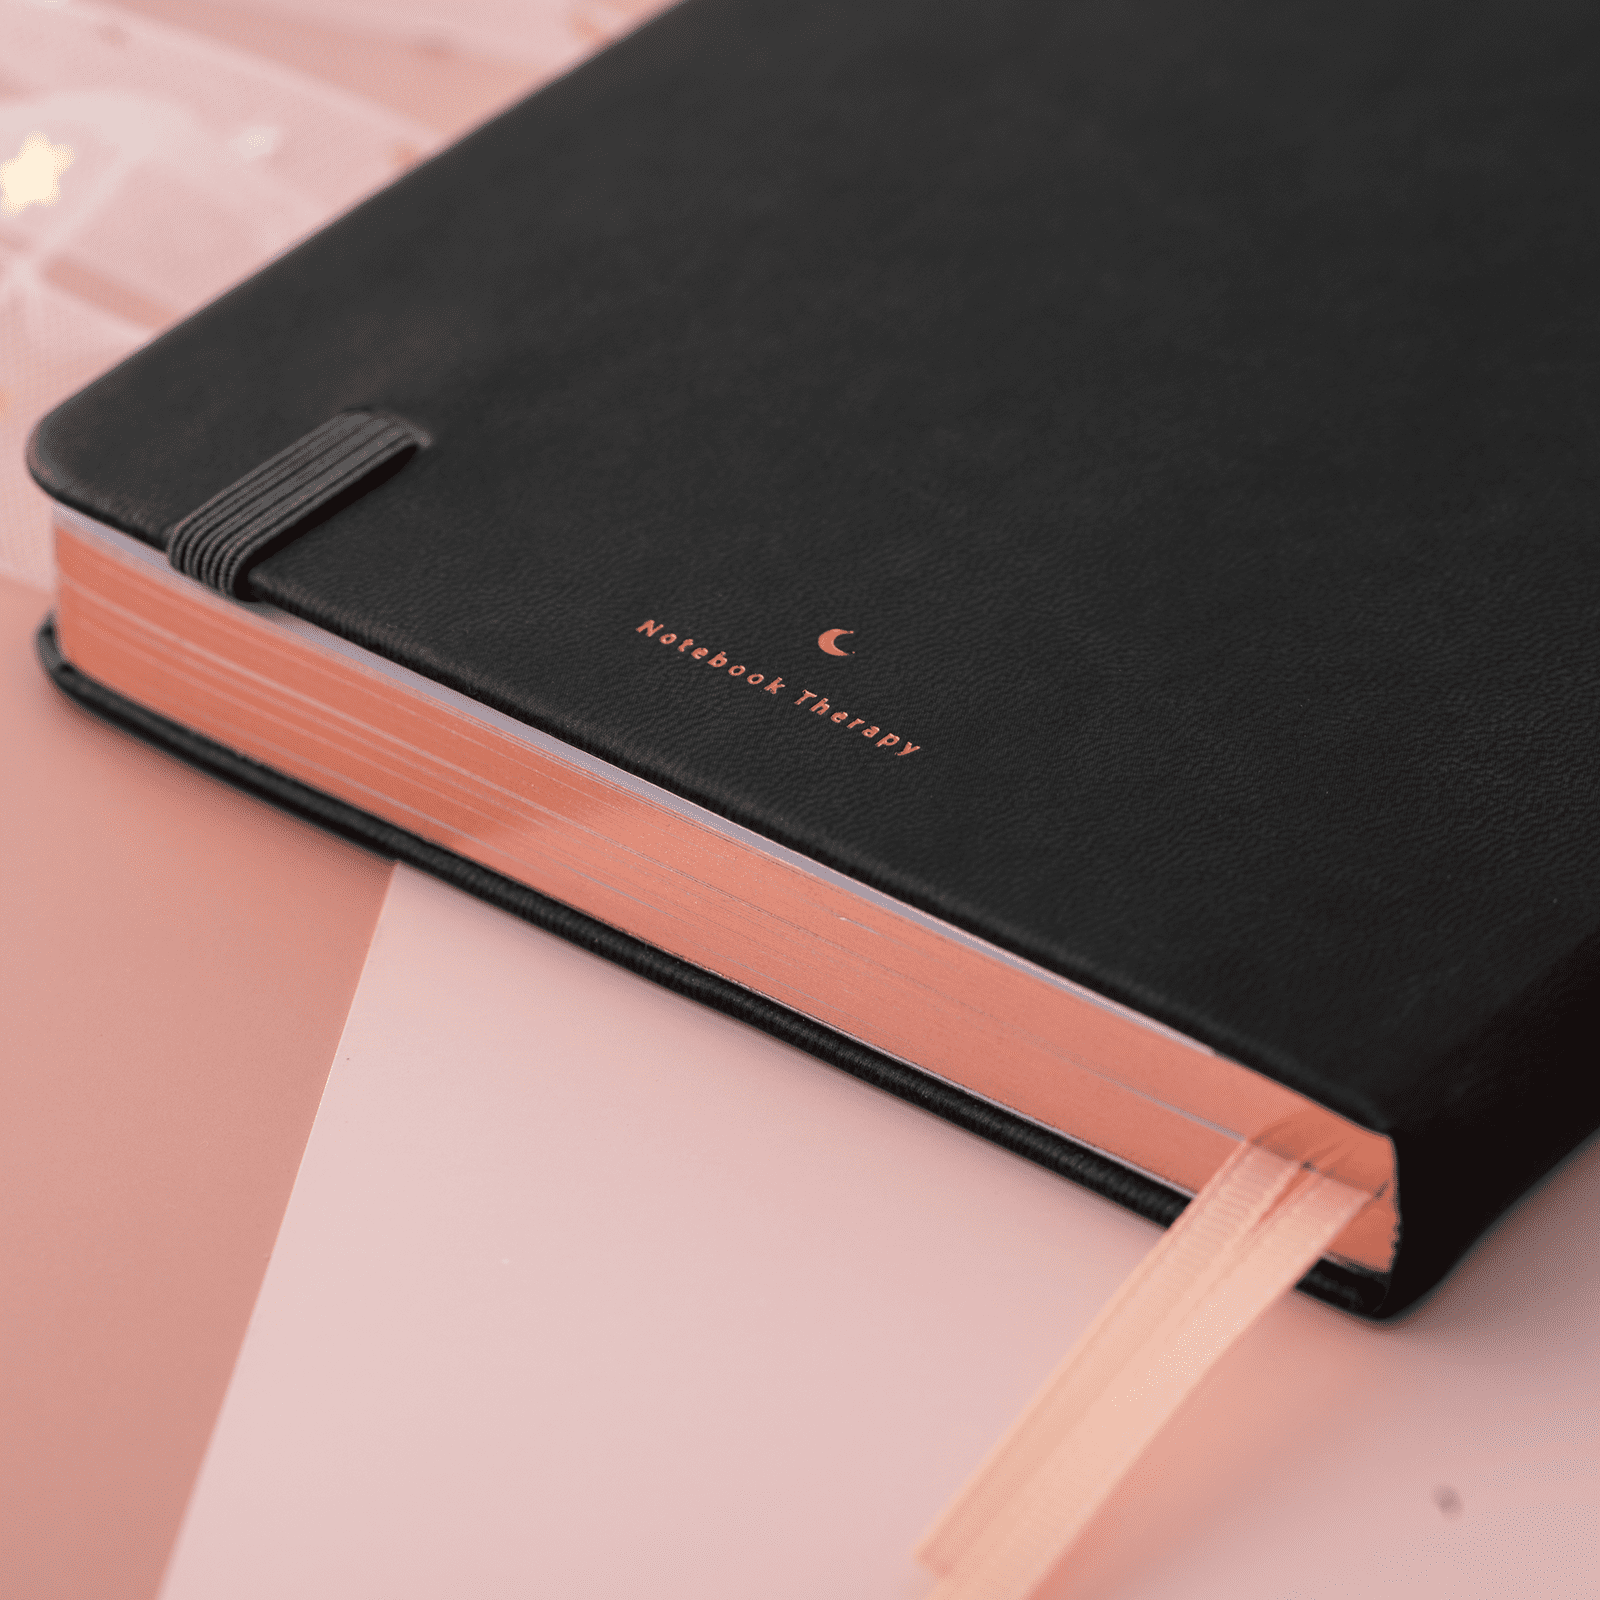 Tsuki ‘Suzume’ Limited Edition Bullet Journal ☾ - Original (128 pages)